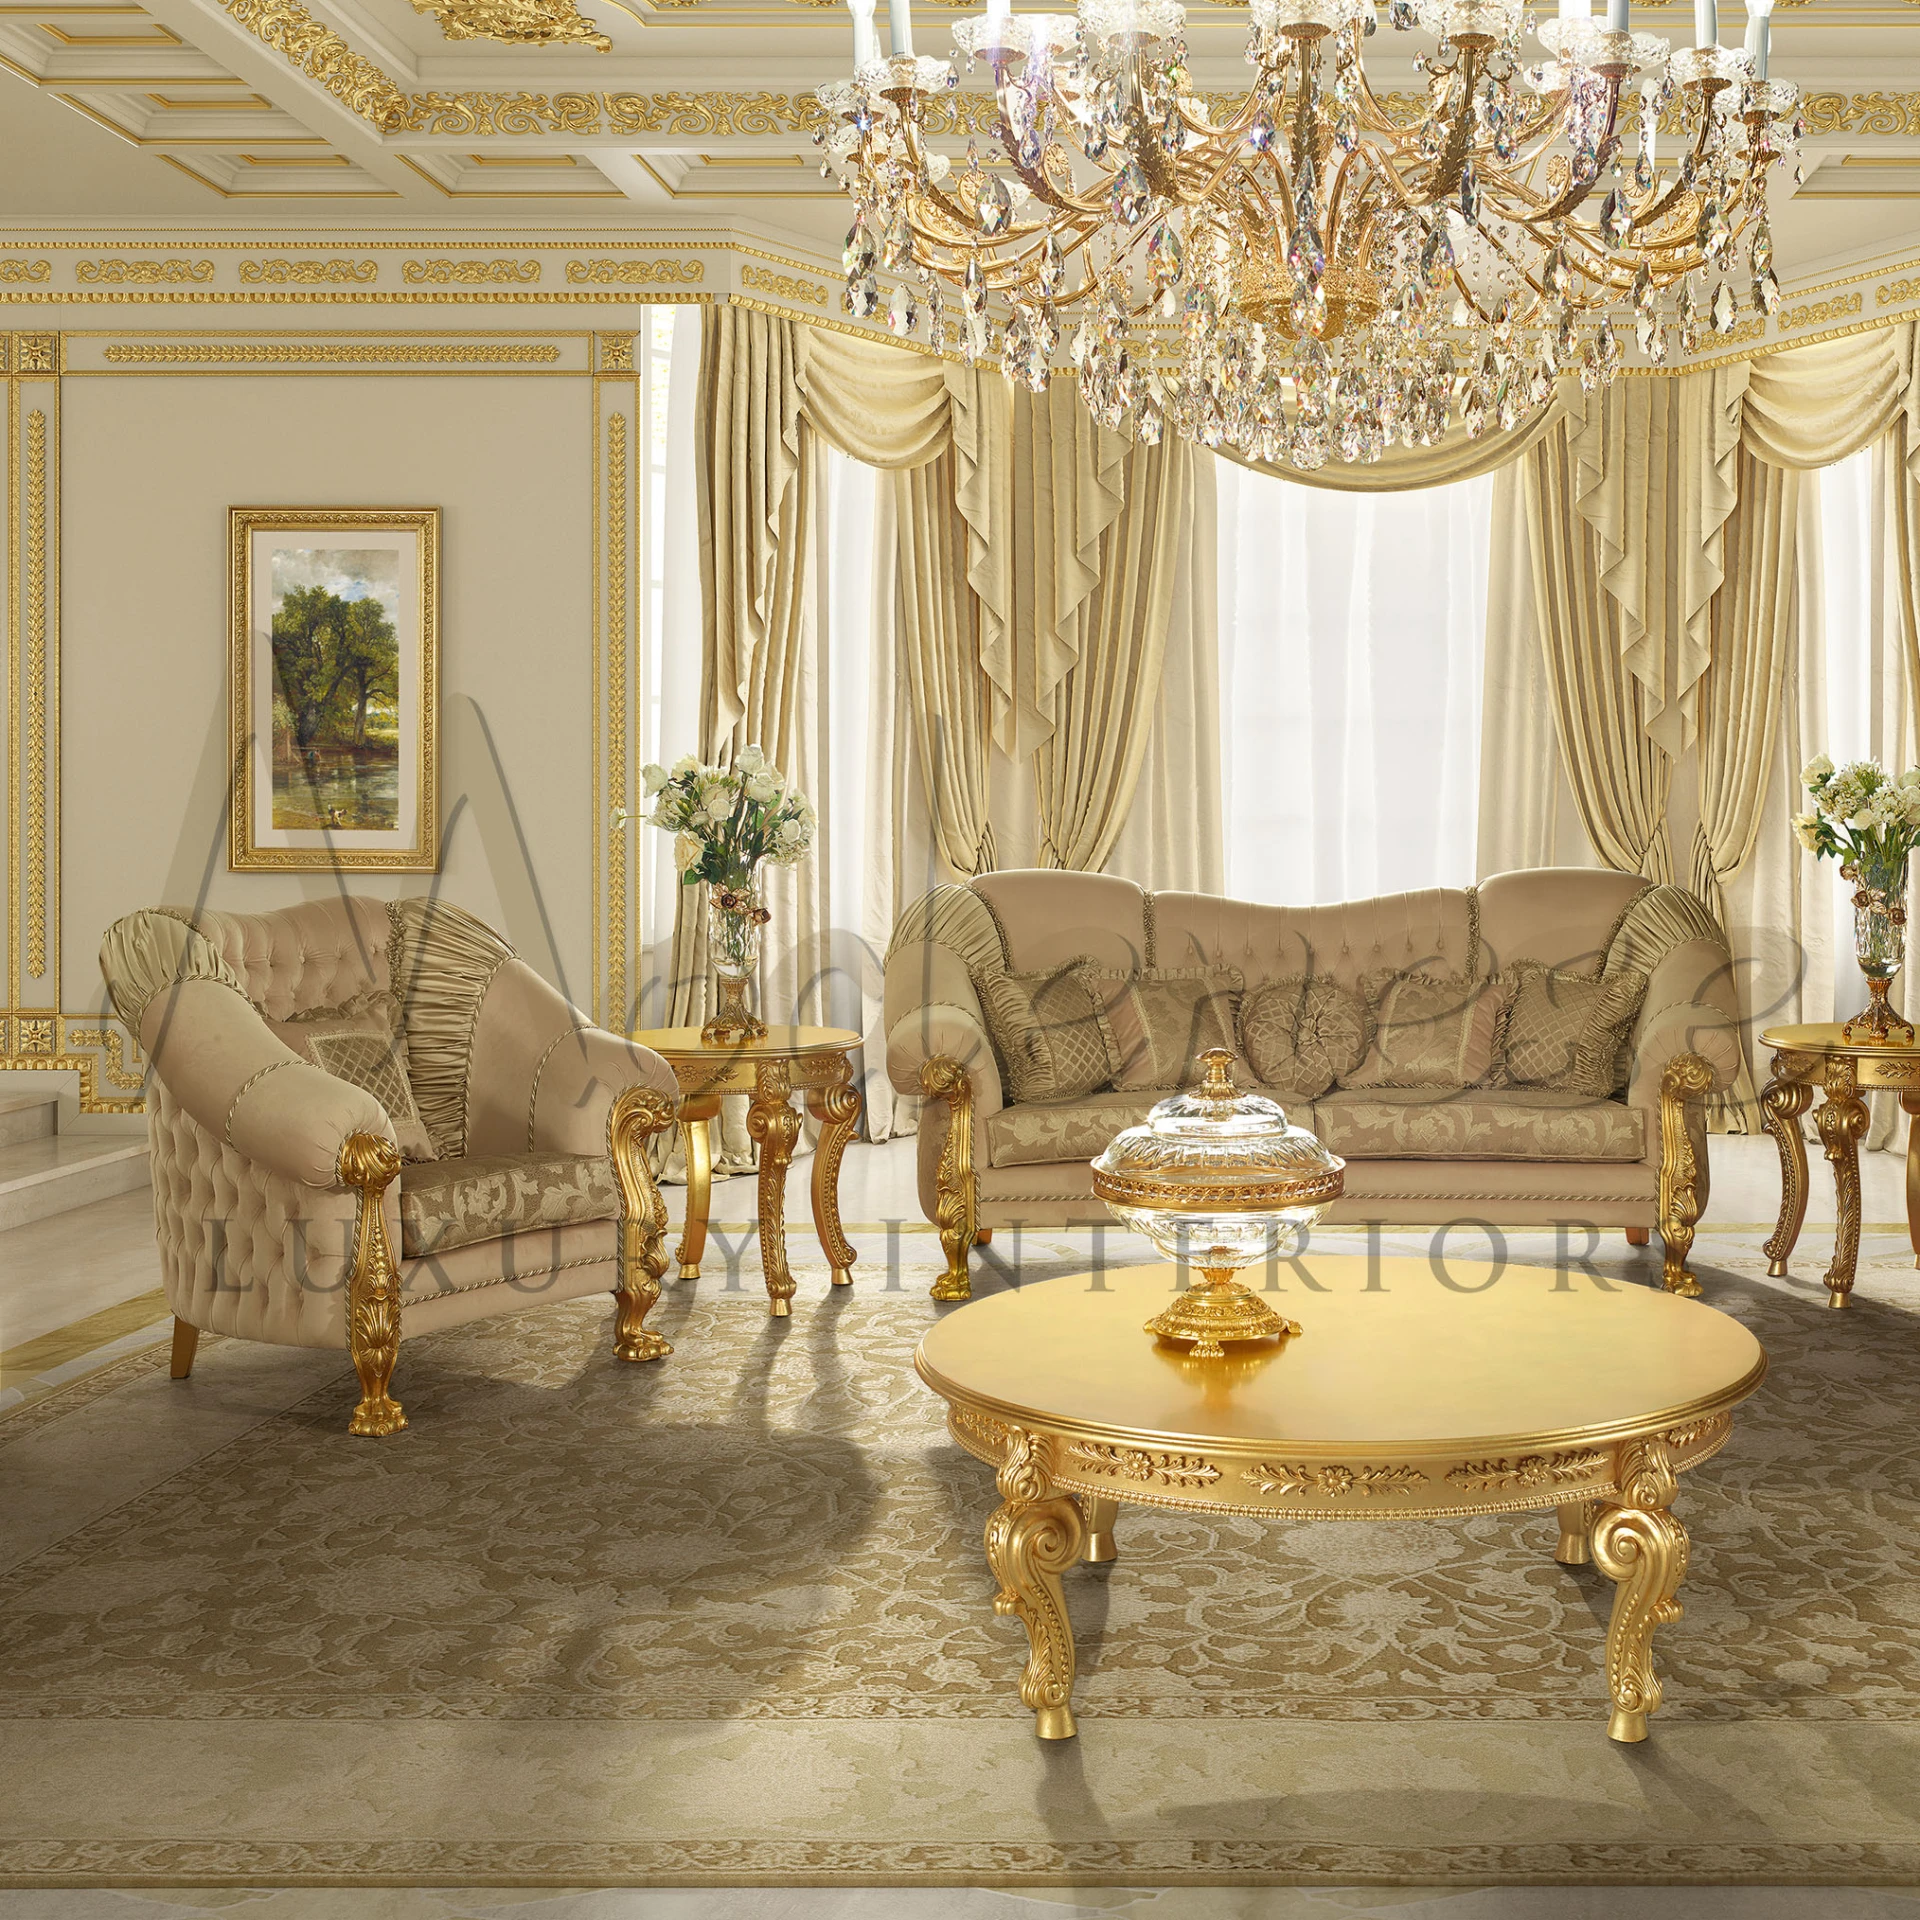 Vintage-inspired Gilded Armchair for Regal Living Spaces